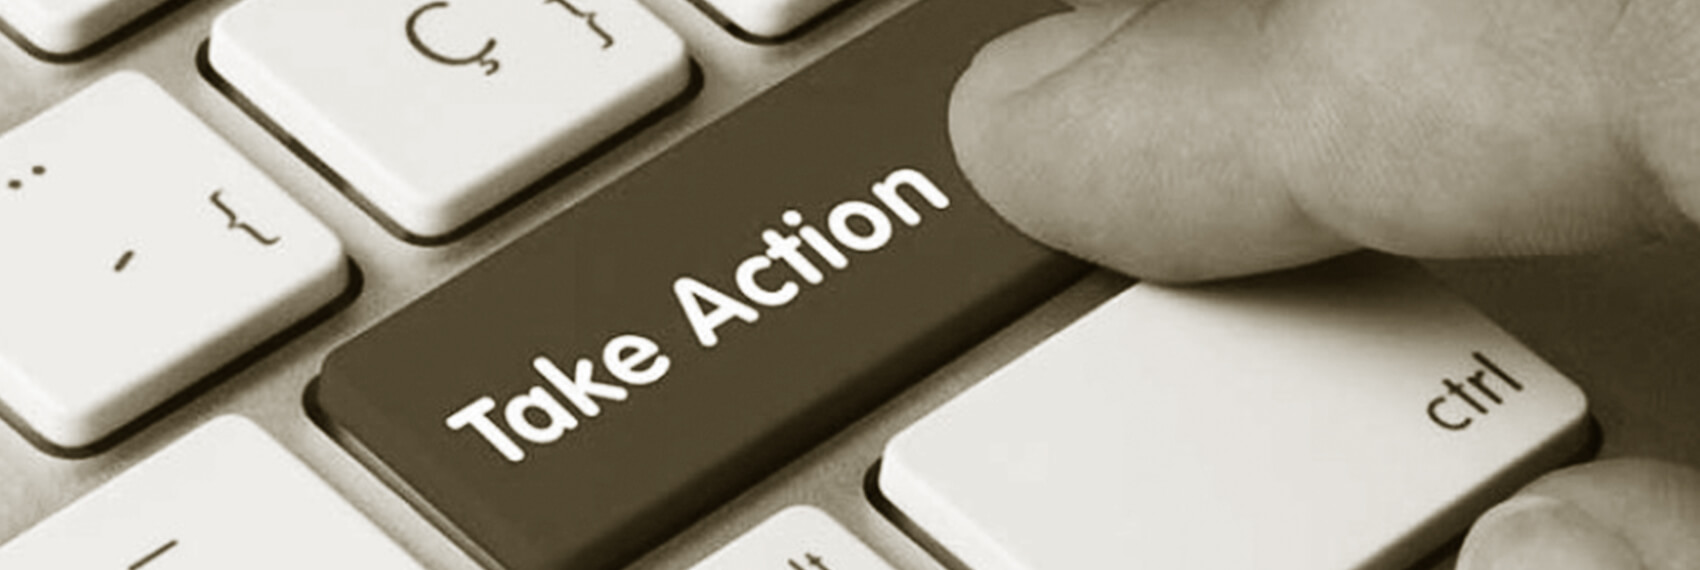 Fingure pressing Take Action button on keyboard